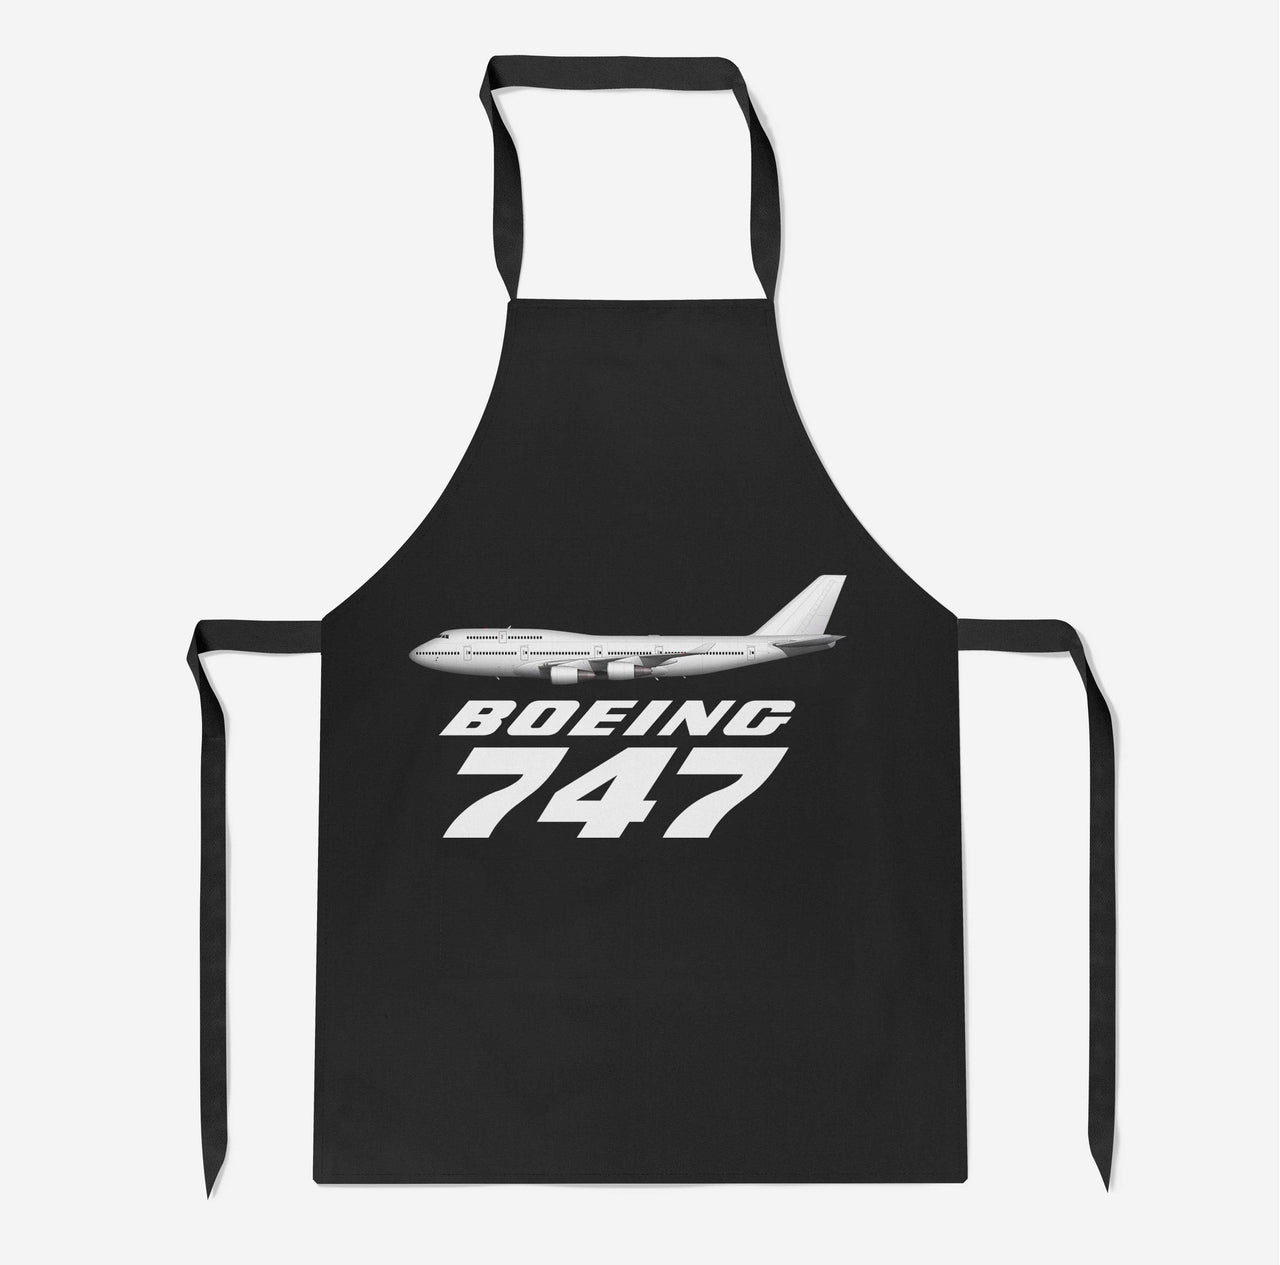 The Boeing 747 Designed Kitchen Aprons